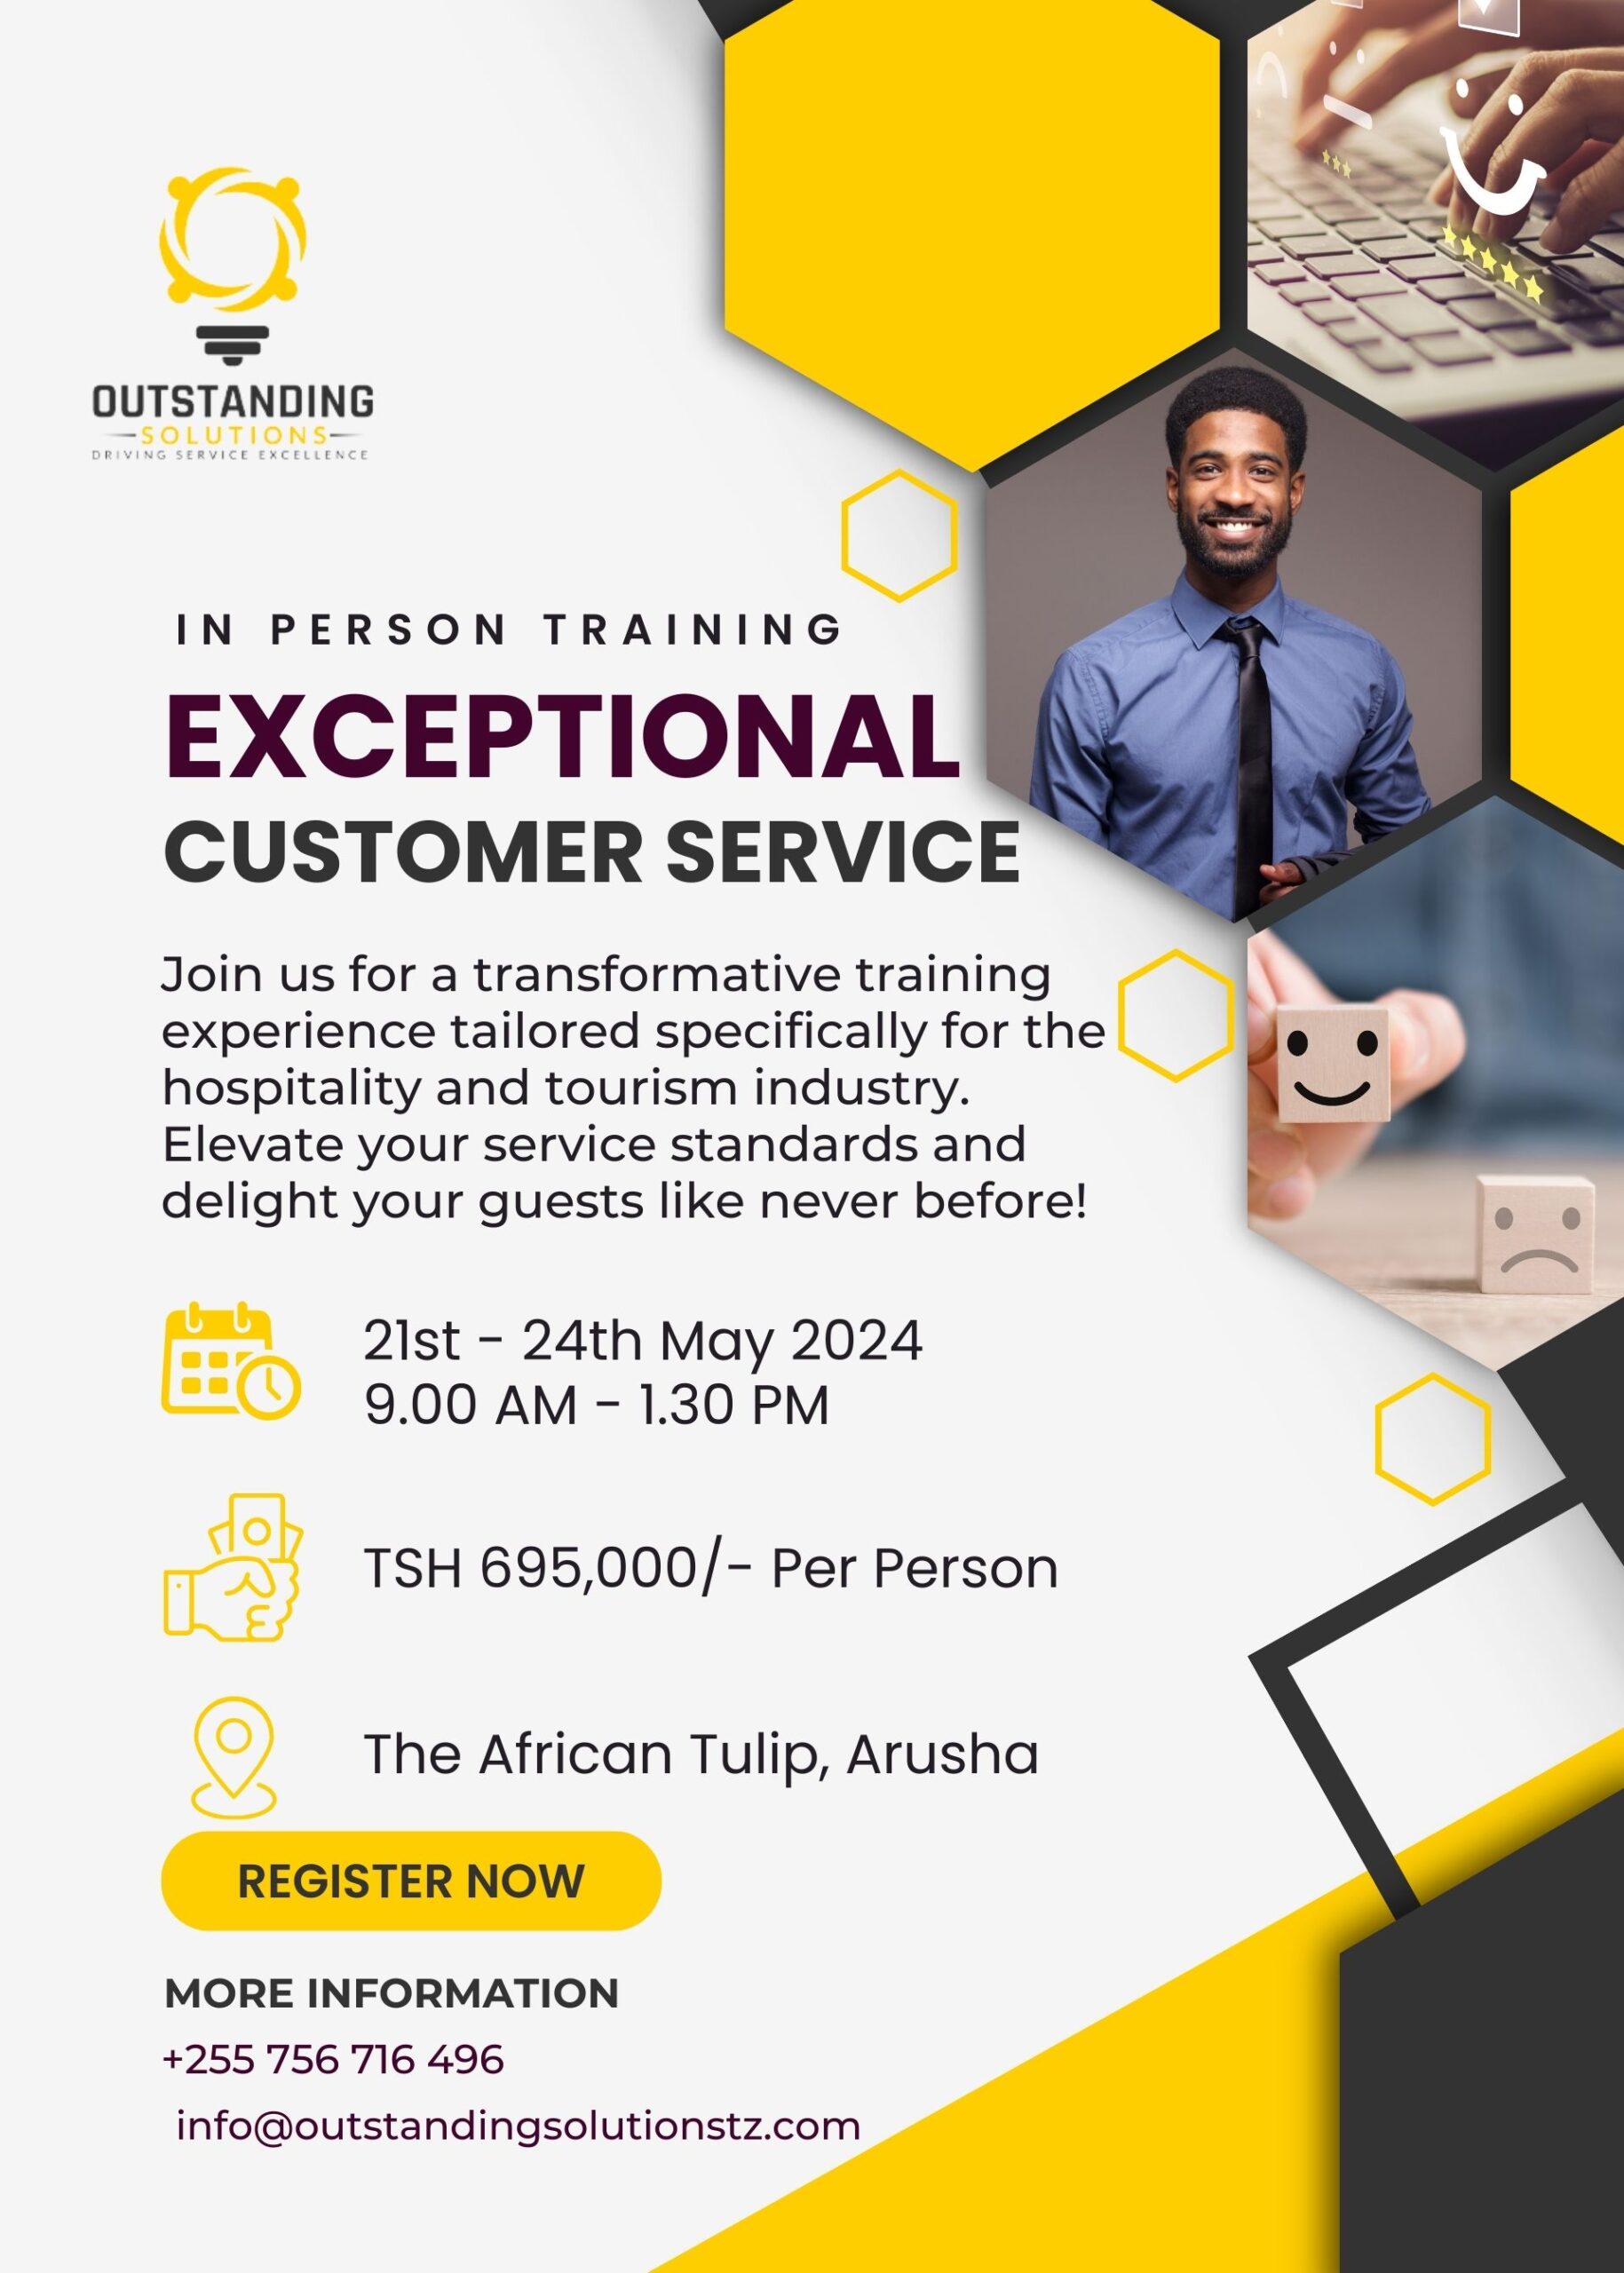 EXCEPTIONAL CUSTOMER SERVICE TRAINING